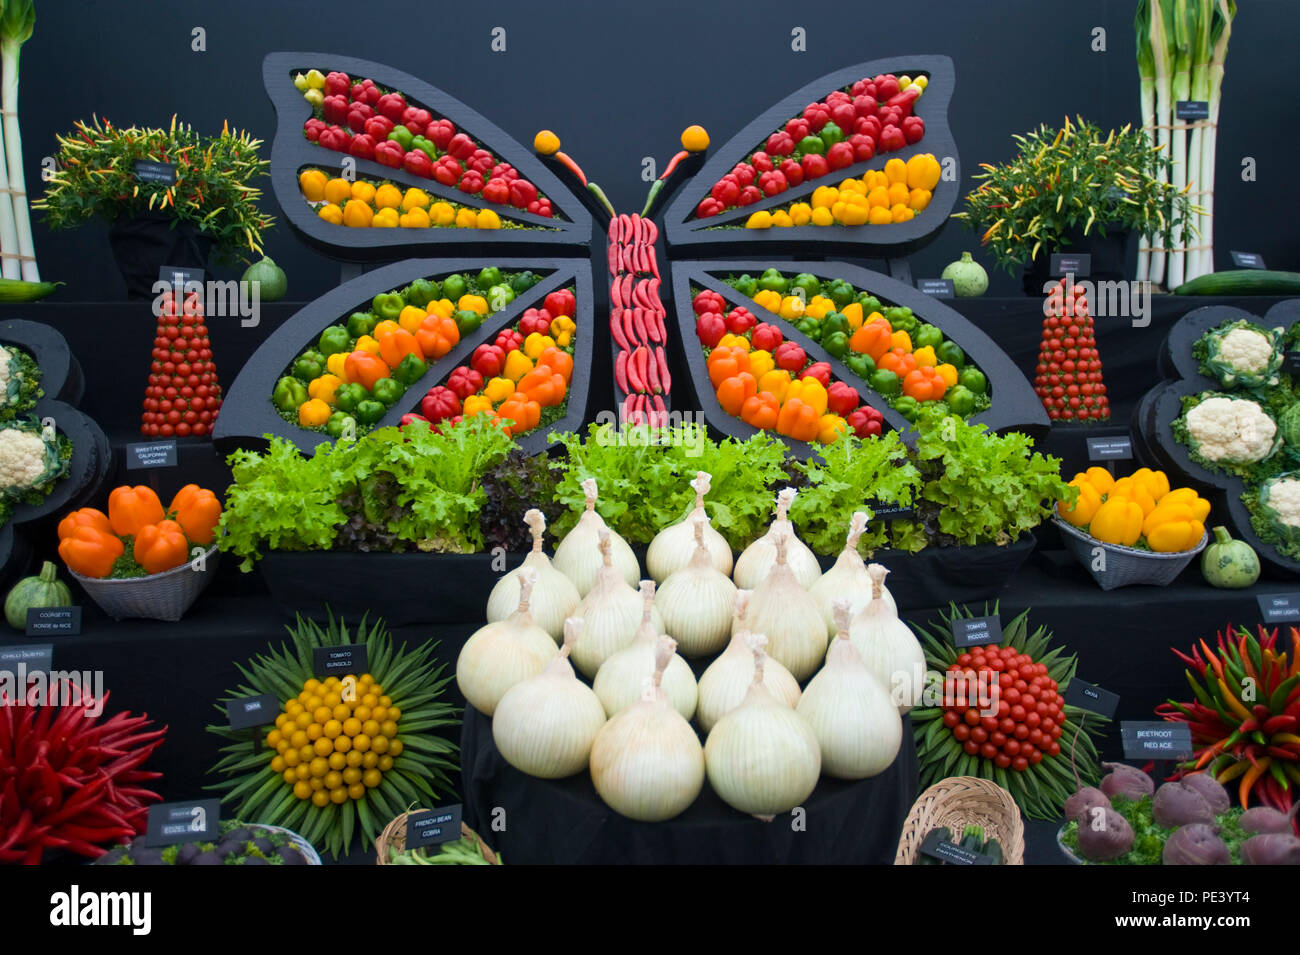 Display by the National Vegetable Society at RHS Tatton Park flower show Cheshire England UK Stock Photo